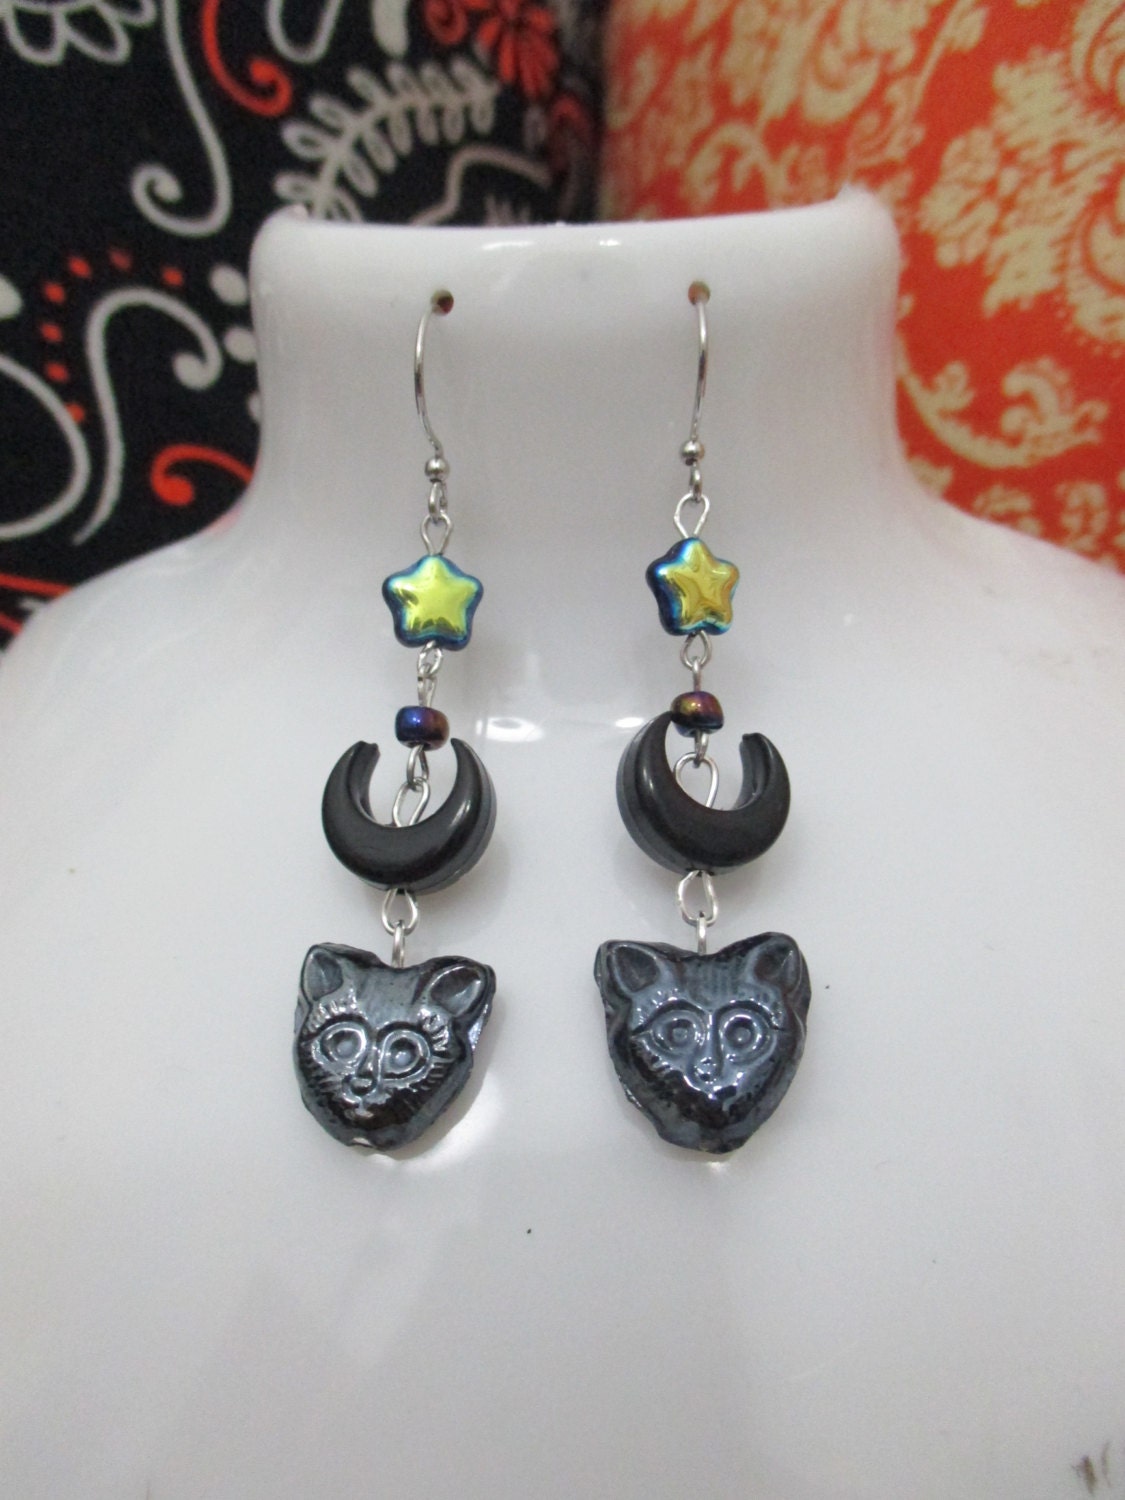 The Familiar Black Cat Dangle Earrings with Crescent Moon